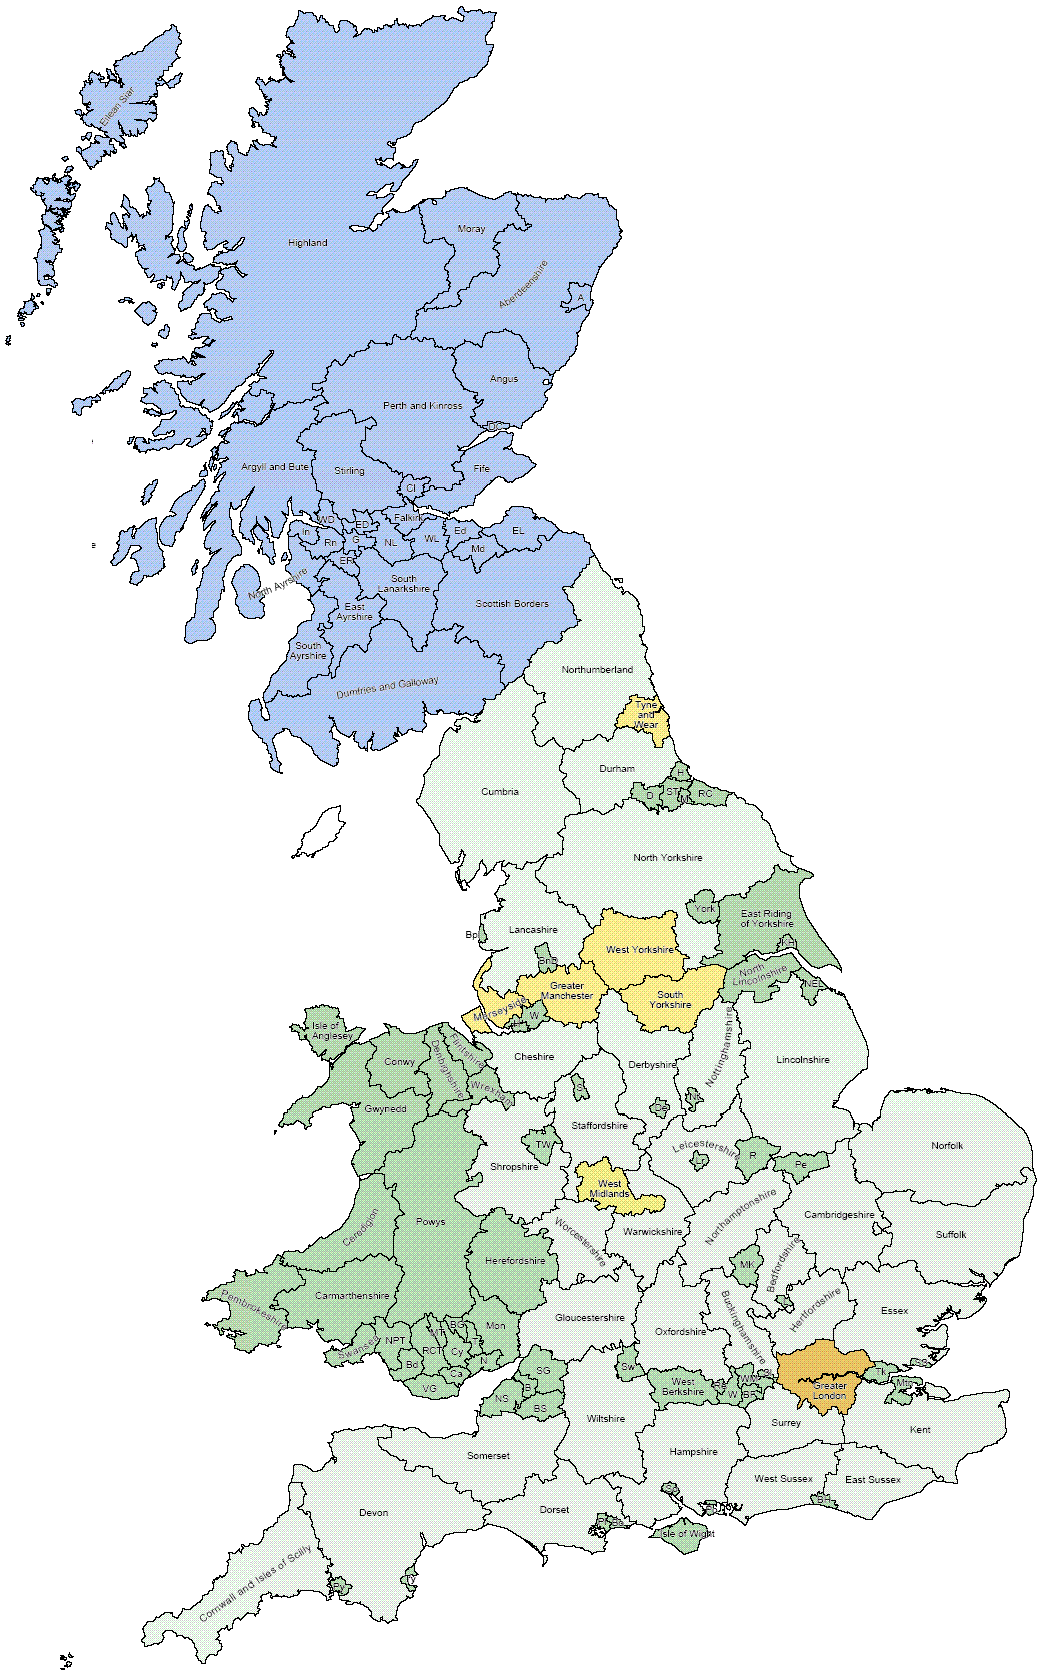 counties-in-uk-mapsof